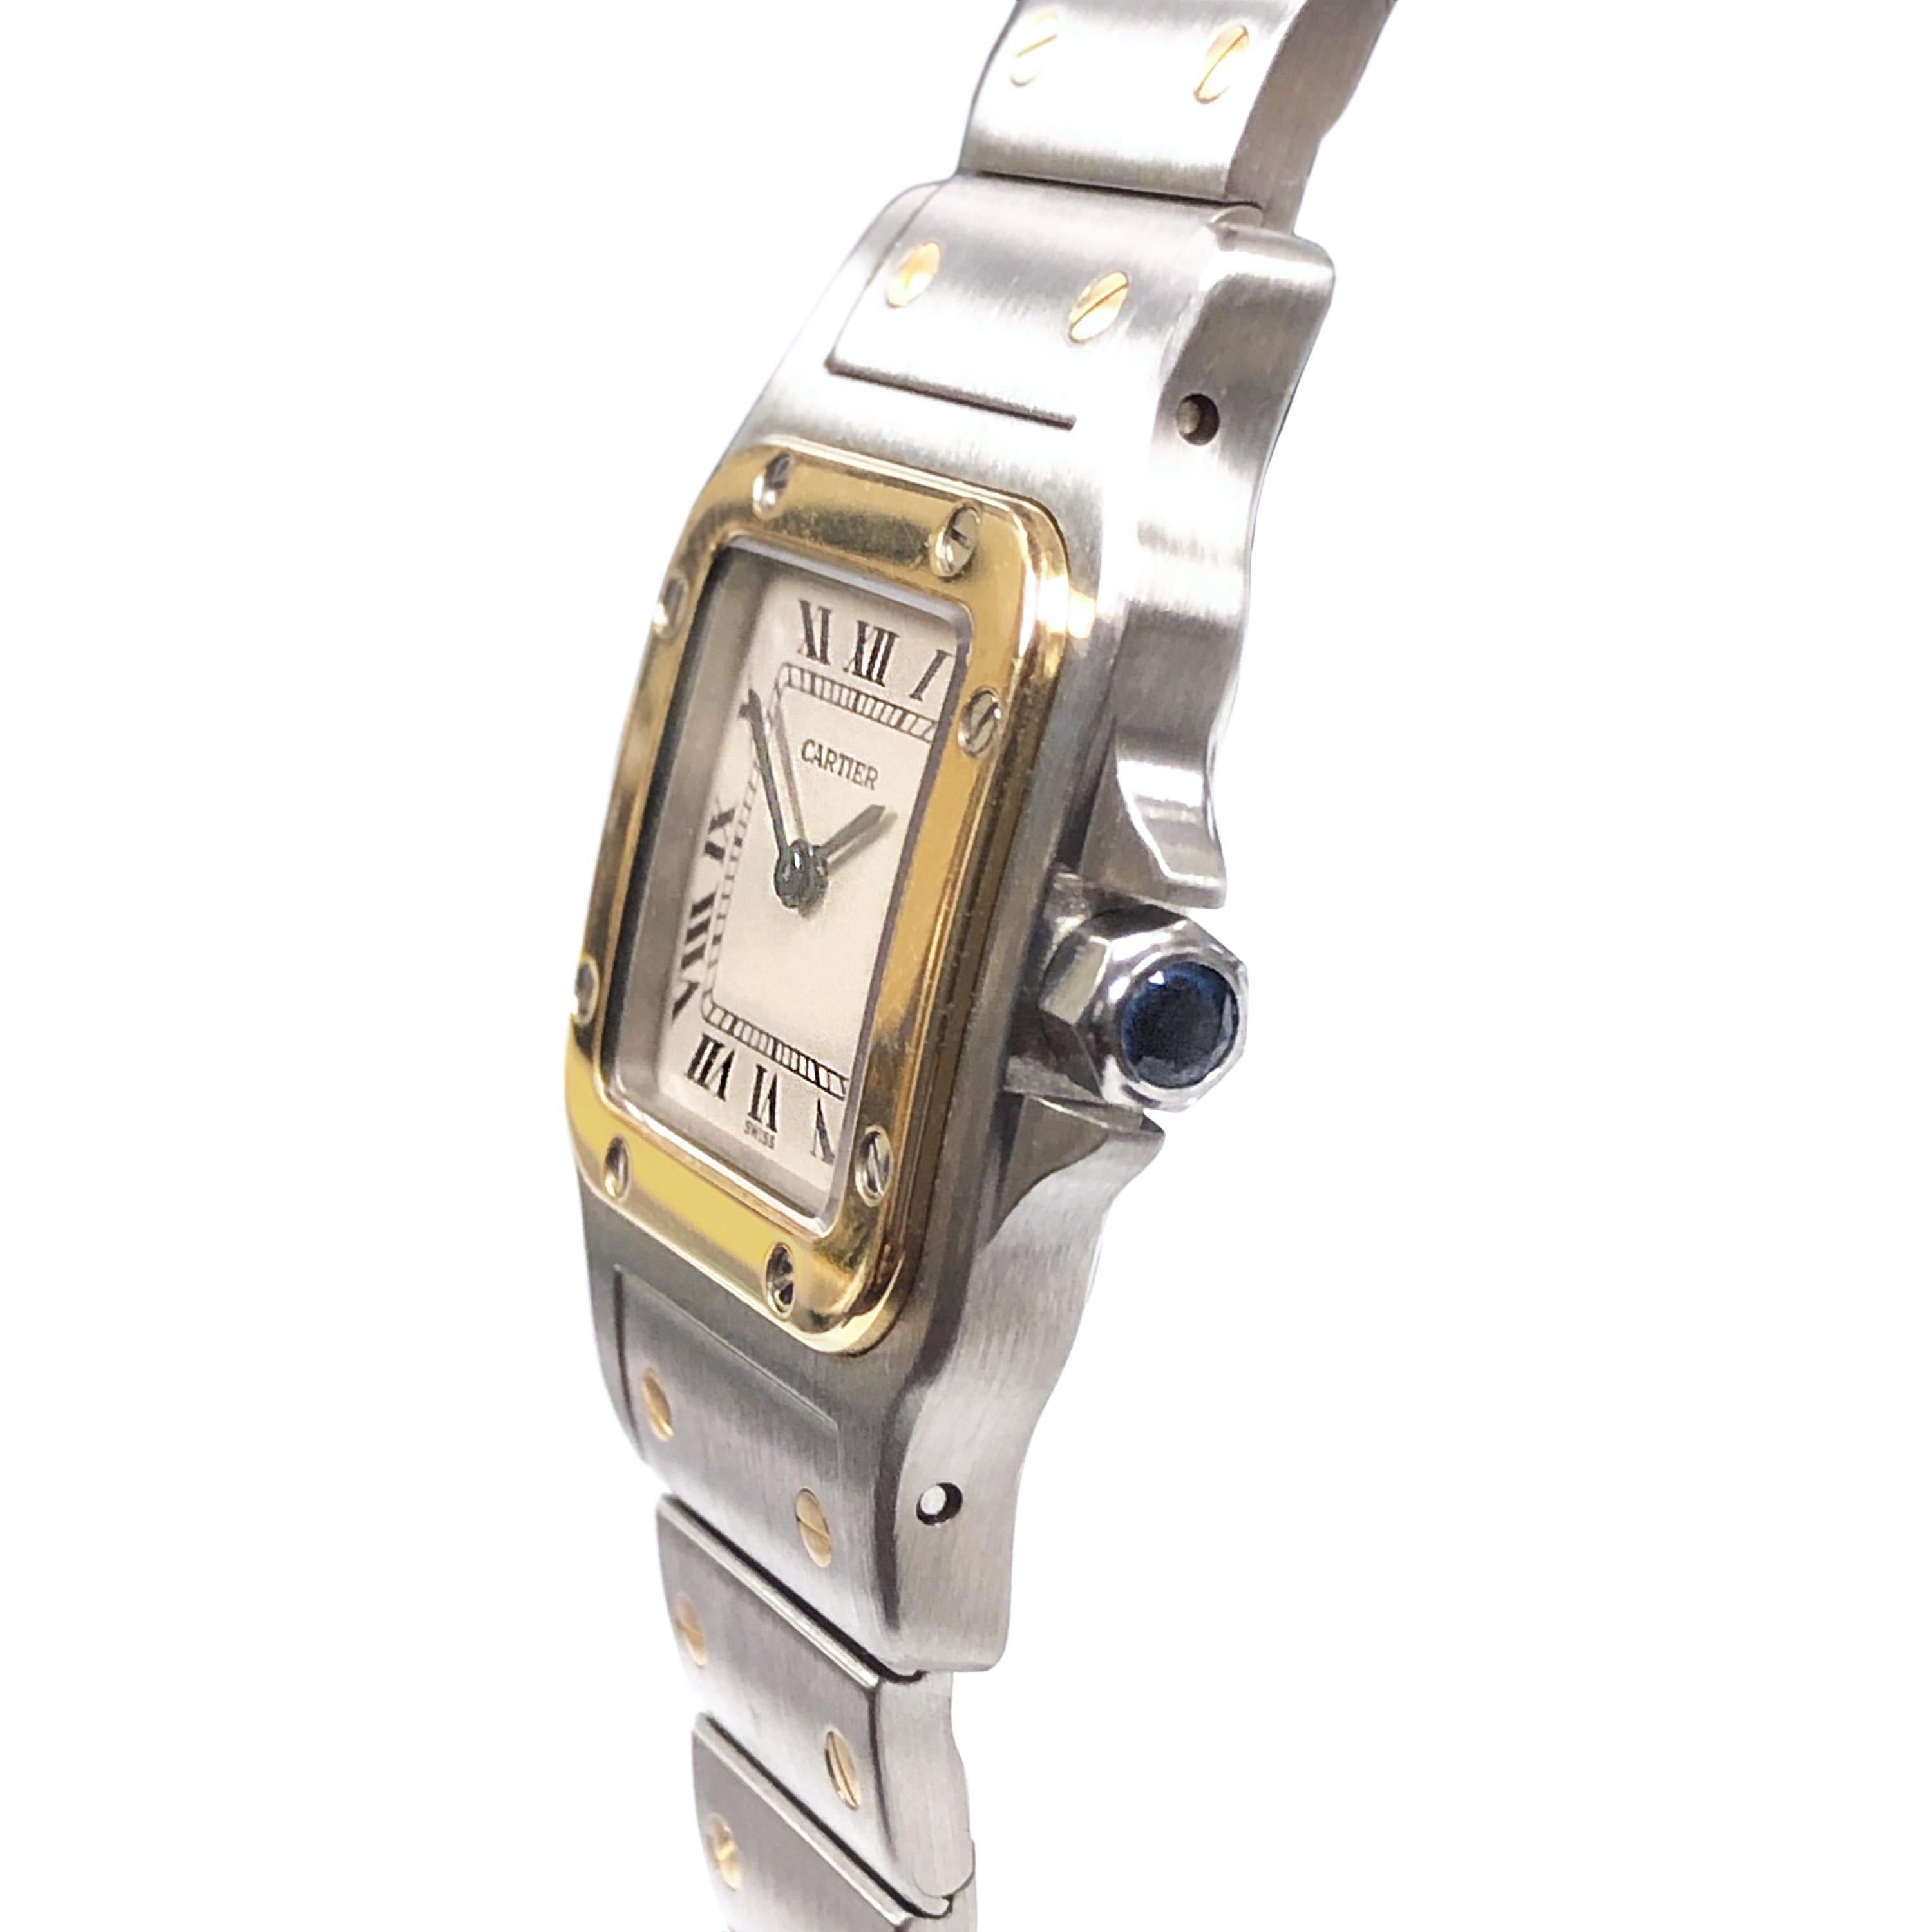 Circa 2000 Cartier Santos Ladies Wrist watch, 35 X 33 MM Stainless Steel and 18K Yellow Gold Water Resistant case. Quartz Movement, White Dial with Black Roman Numerals and a Sapphire Crown. 1/2 inch wide Steel and 18K bracelet with Deployment